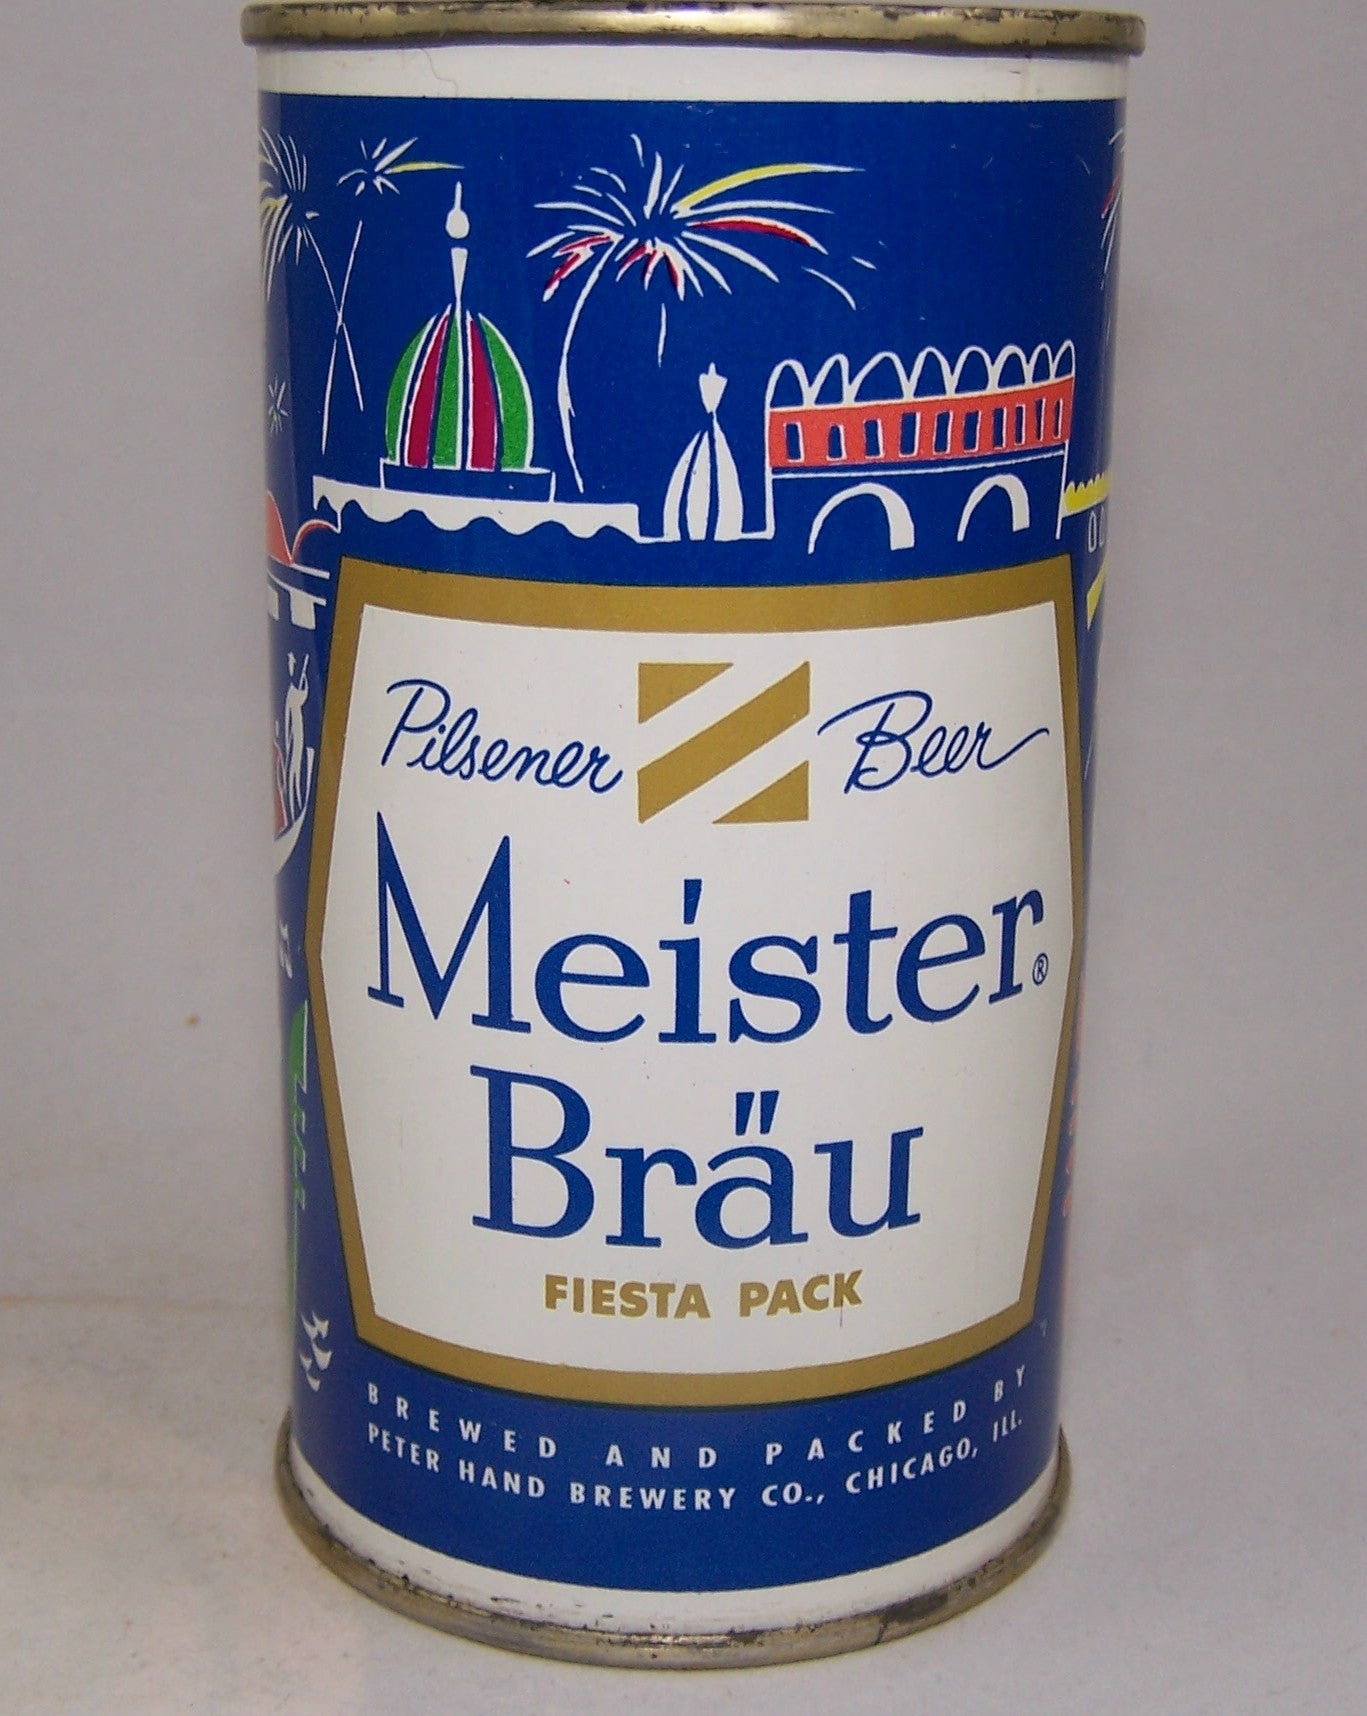 Meister Brau Pilsener Beer, Country Can, (Italy) USBC 97-08, Grade A1+Sold 10/23/15